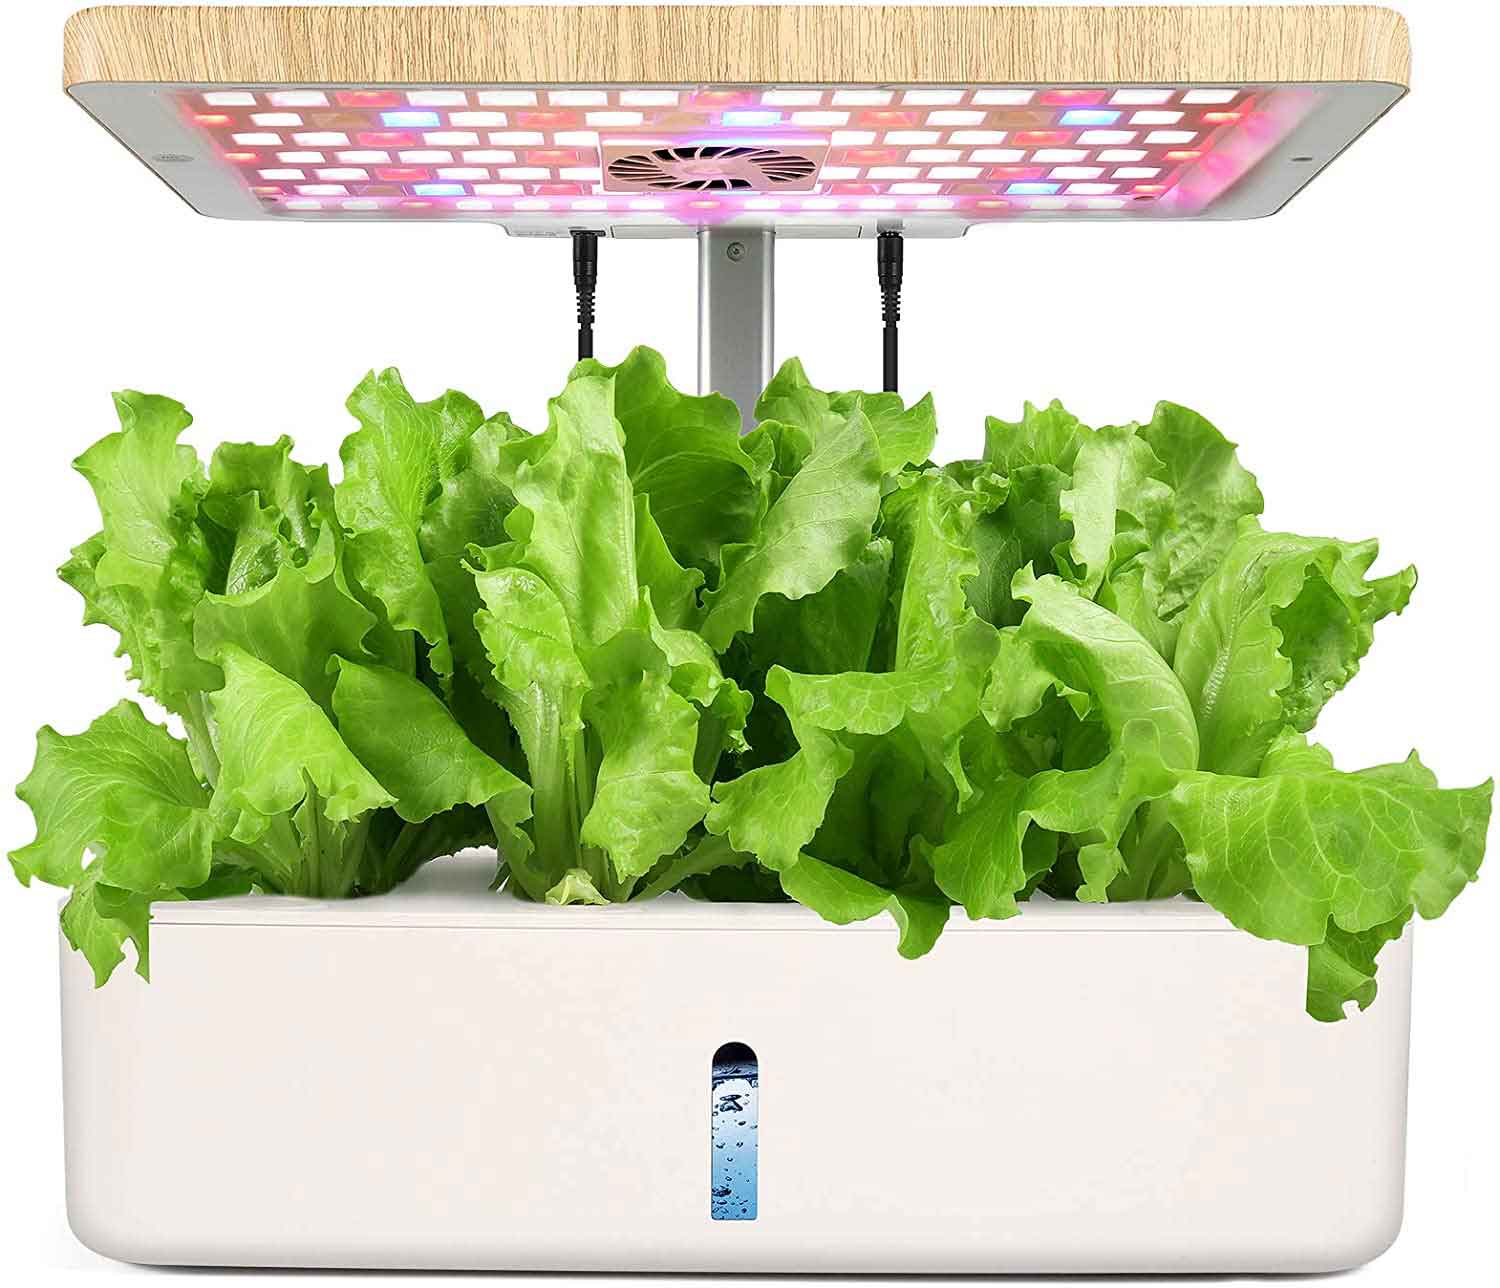 Royalsellpro 12 Pods Hydroponic Growing System